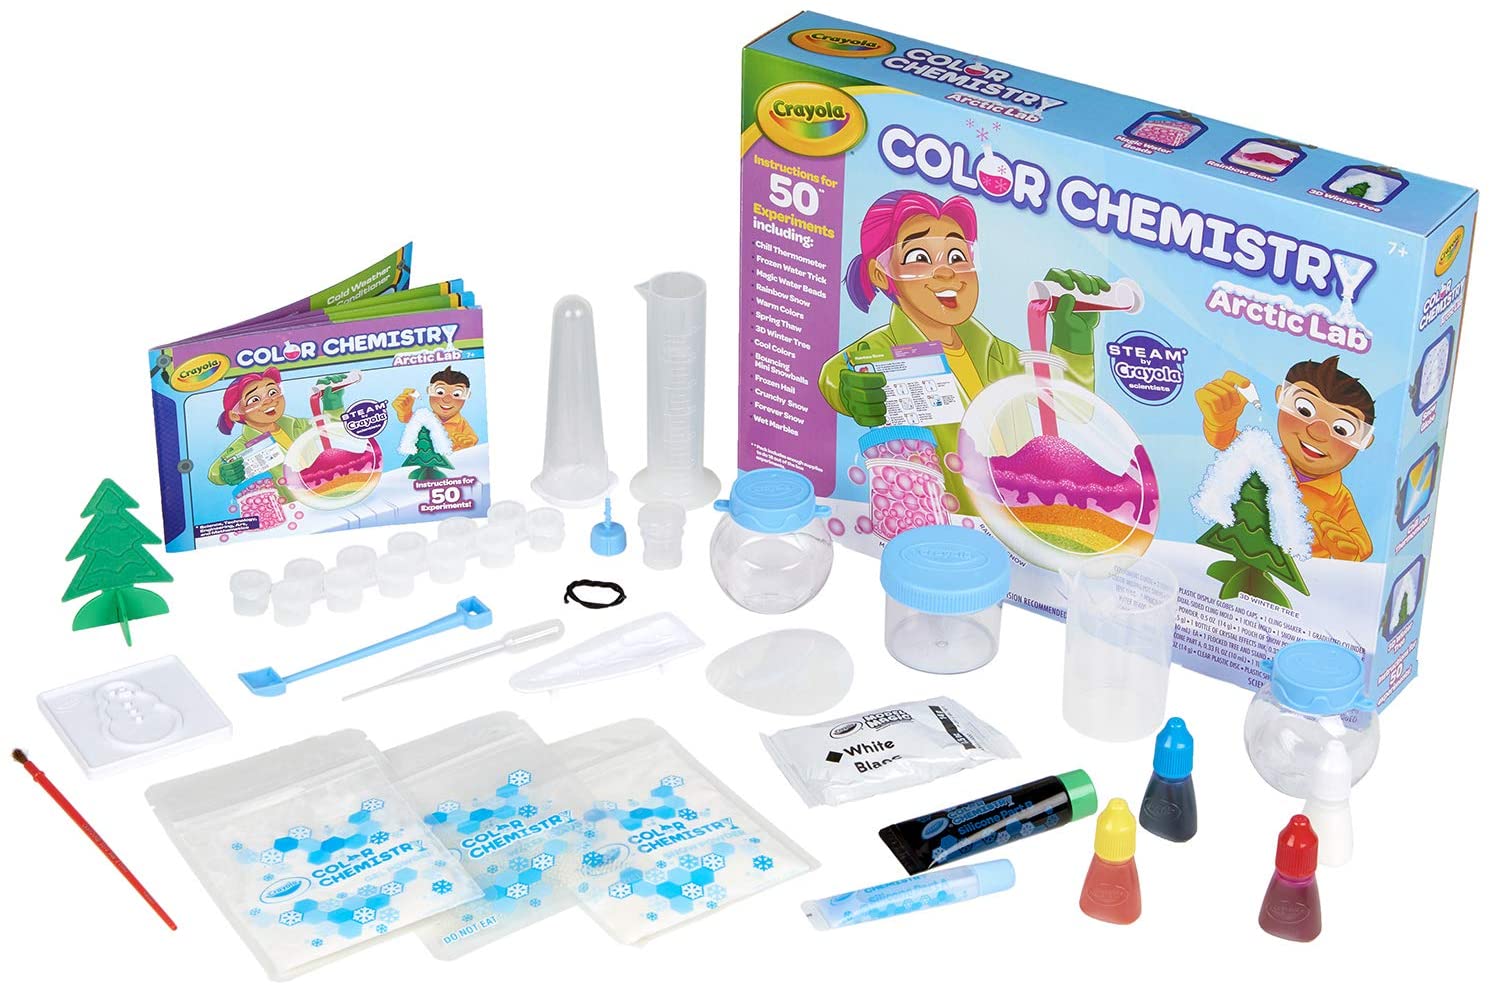 Crayola Artic Color Chemistry Set for Kids, Steam/Stem Activities, Educational Toy